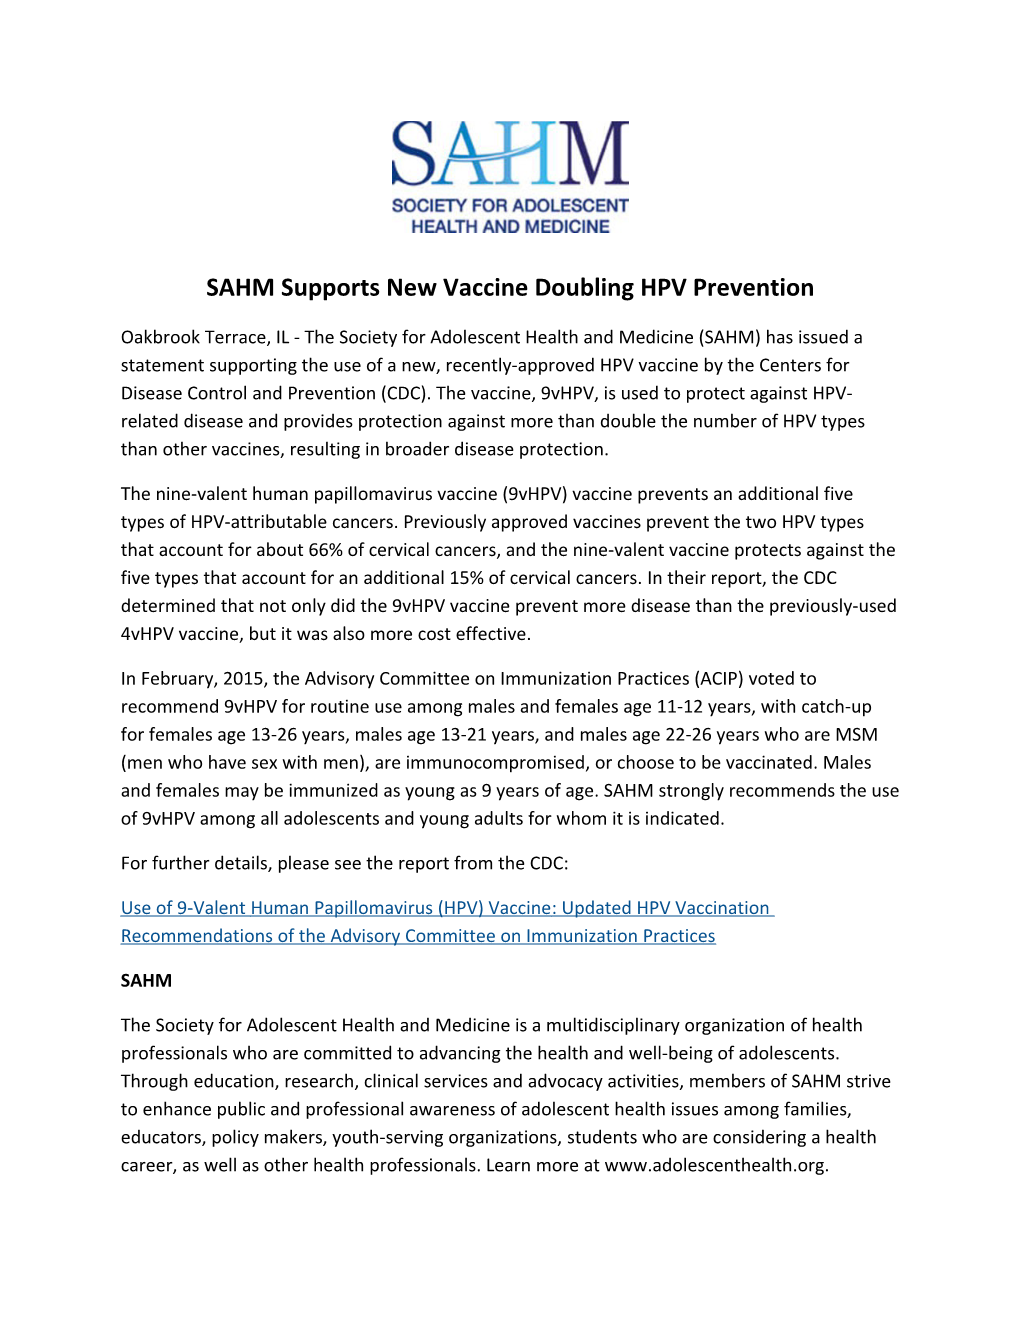 SAHM Supports New Vaccine Doubling HPV Prevention